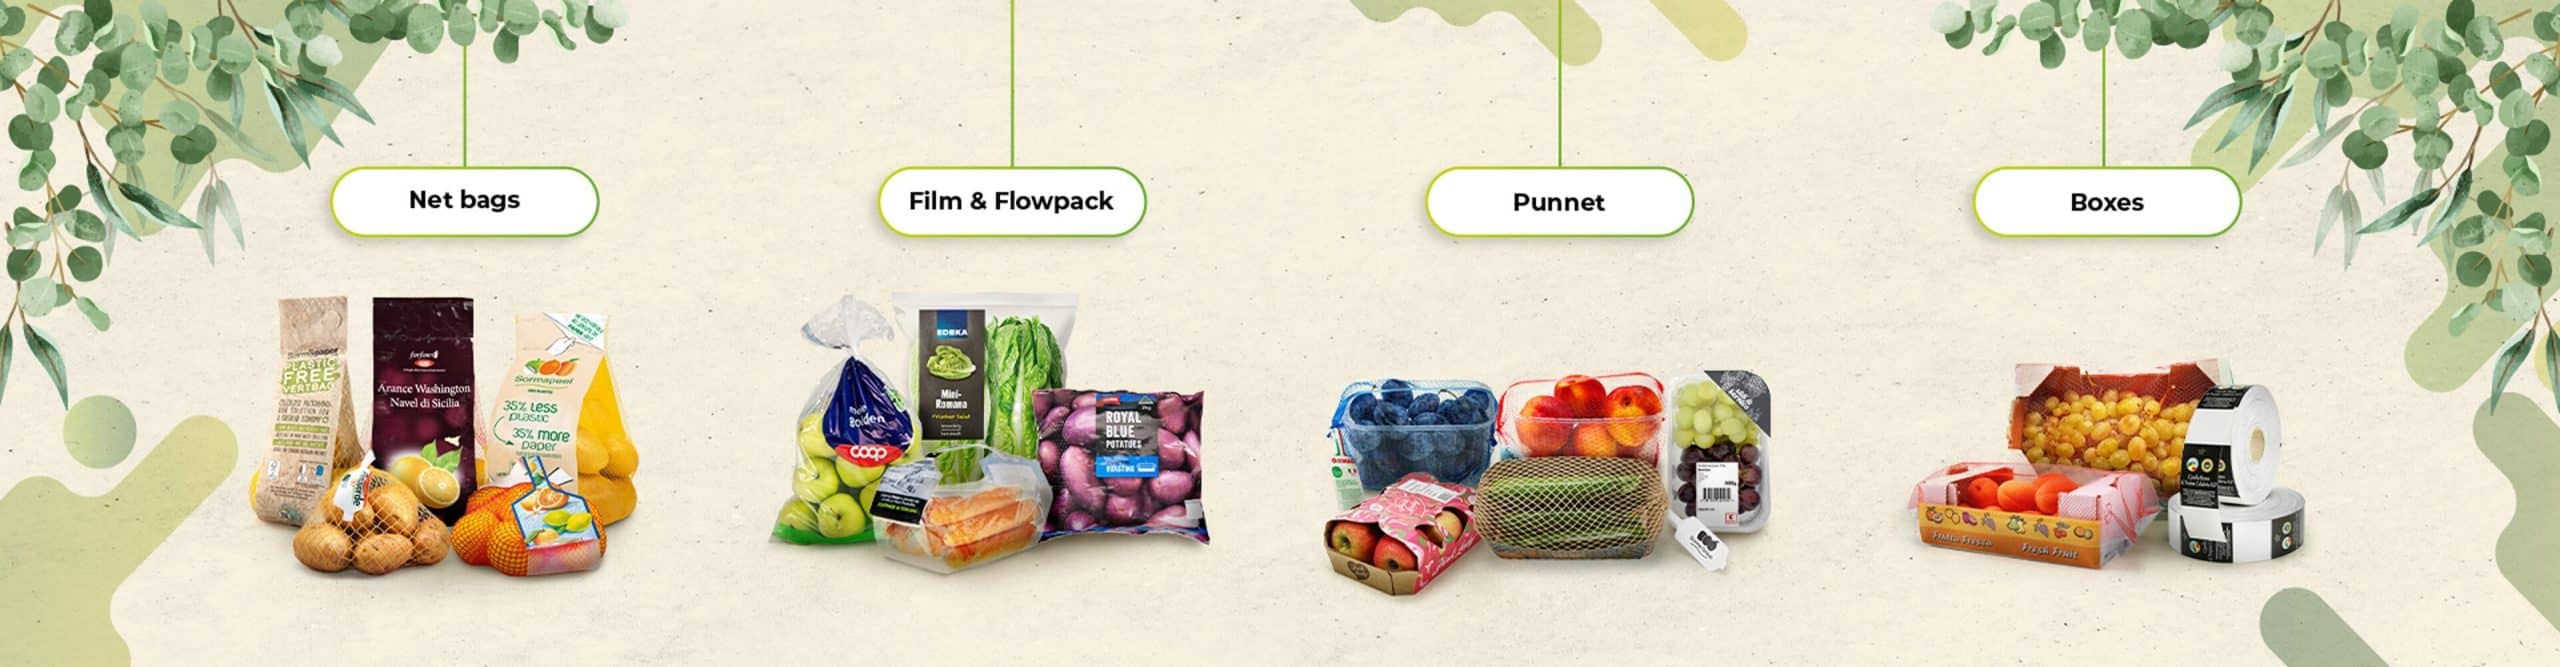 Sorma sustainable packaging groups by product type